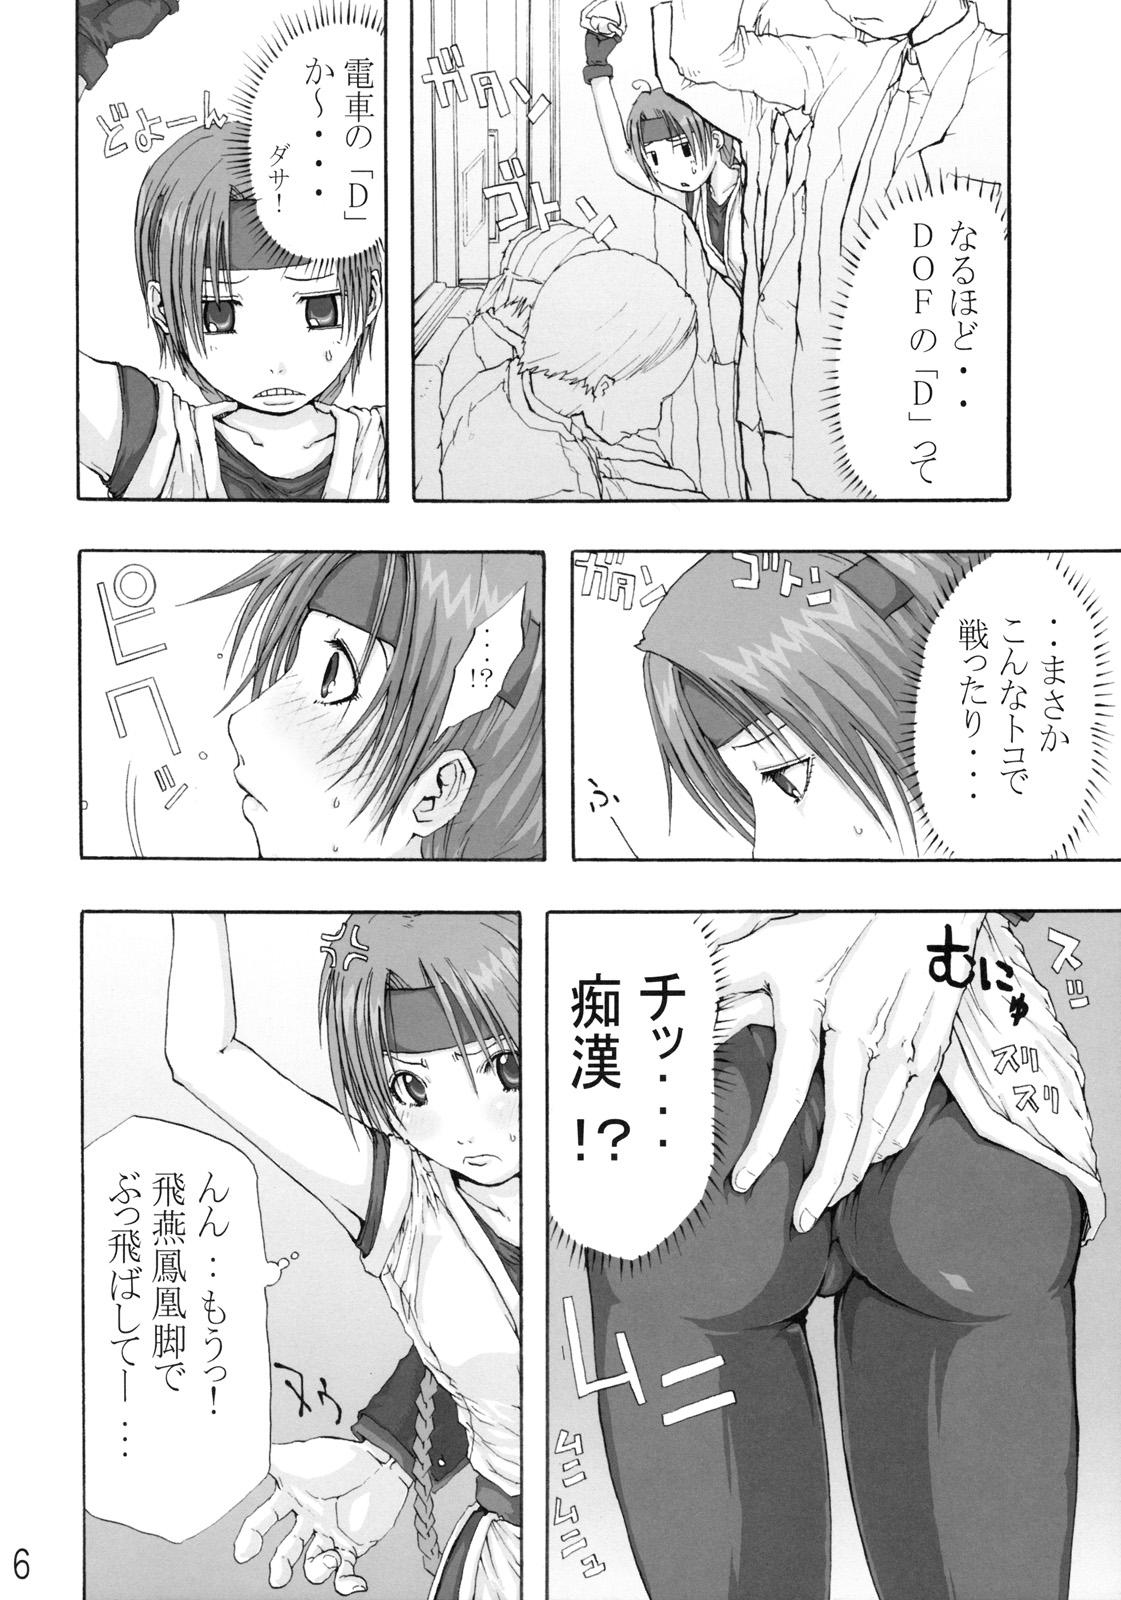 Raw DOF the densya of fighters - King of fighters Fatal fury Creampies - Page 7